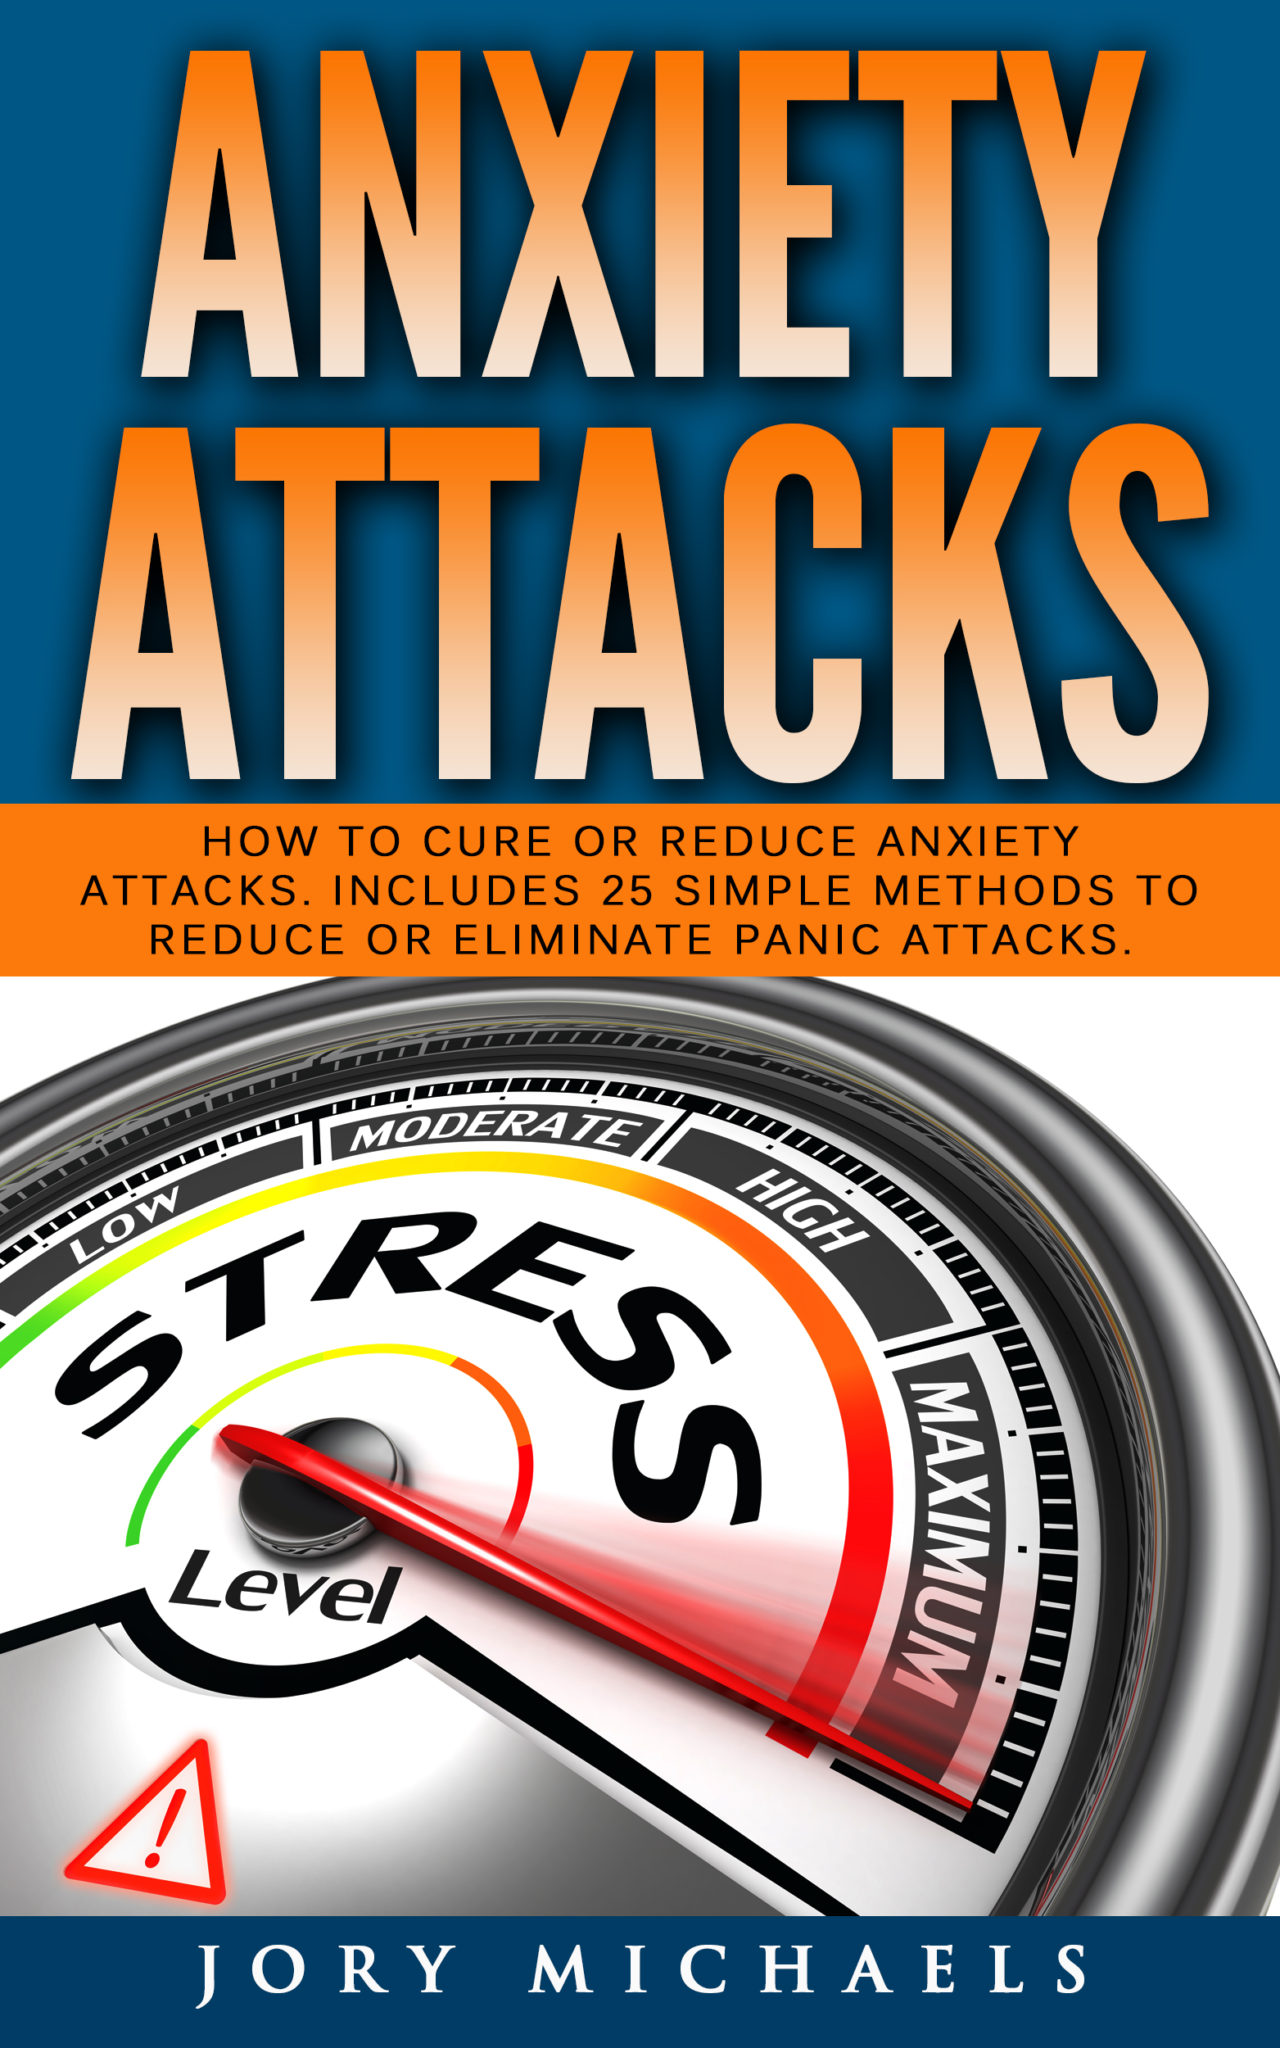 FREE: Anxiety Attacks – How to cure or reduce anxiety attacks by Jory Michaels